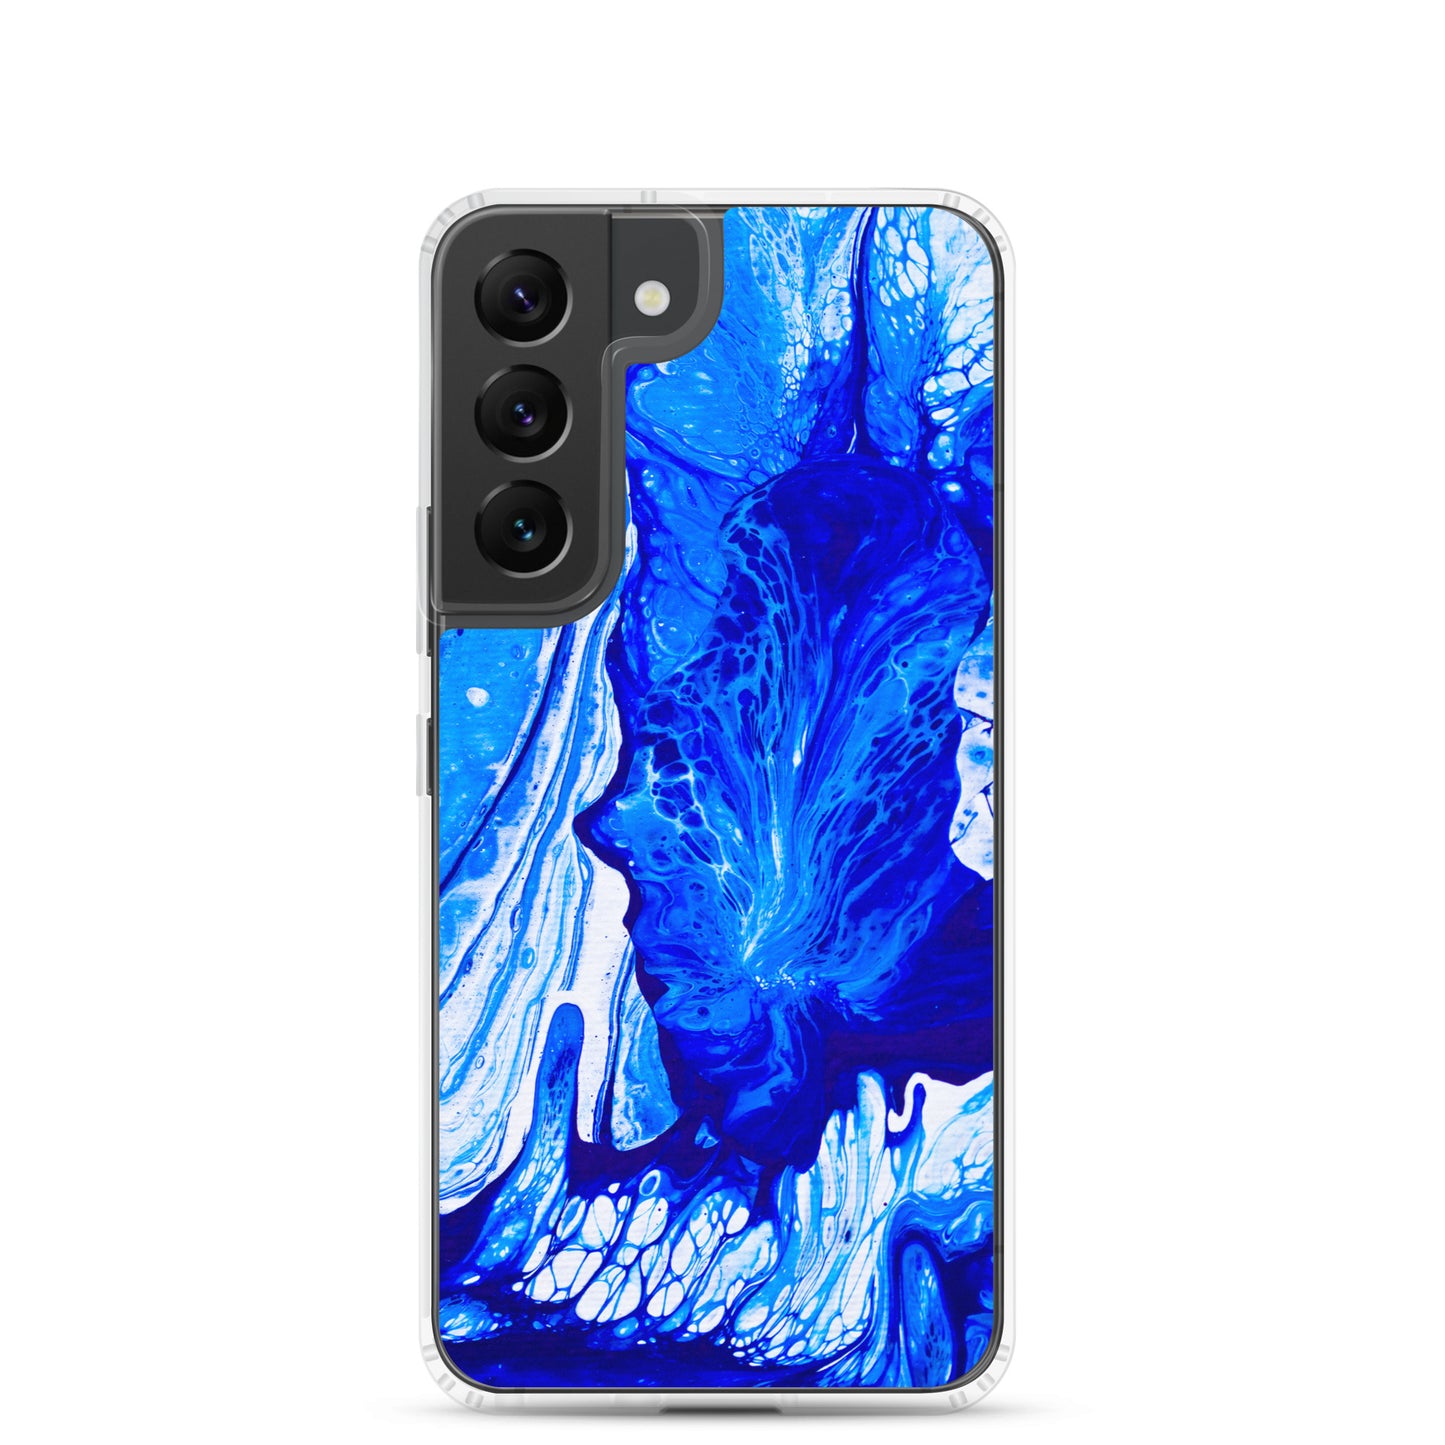 NightOwl Studio Custom Phone Case Compatible with Samsung Galaxy, Slim Cover for Wireless Charging, Drop and Scratch Resistant, Ms. Blue